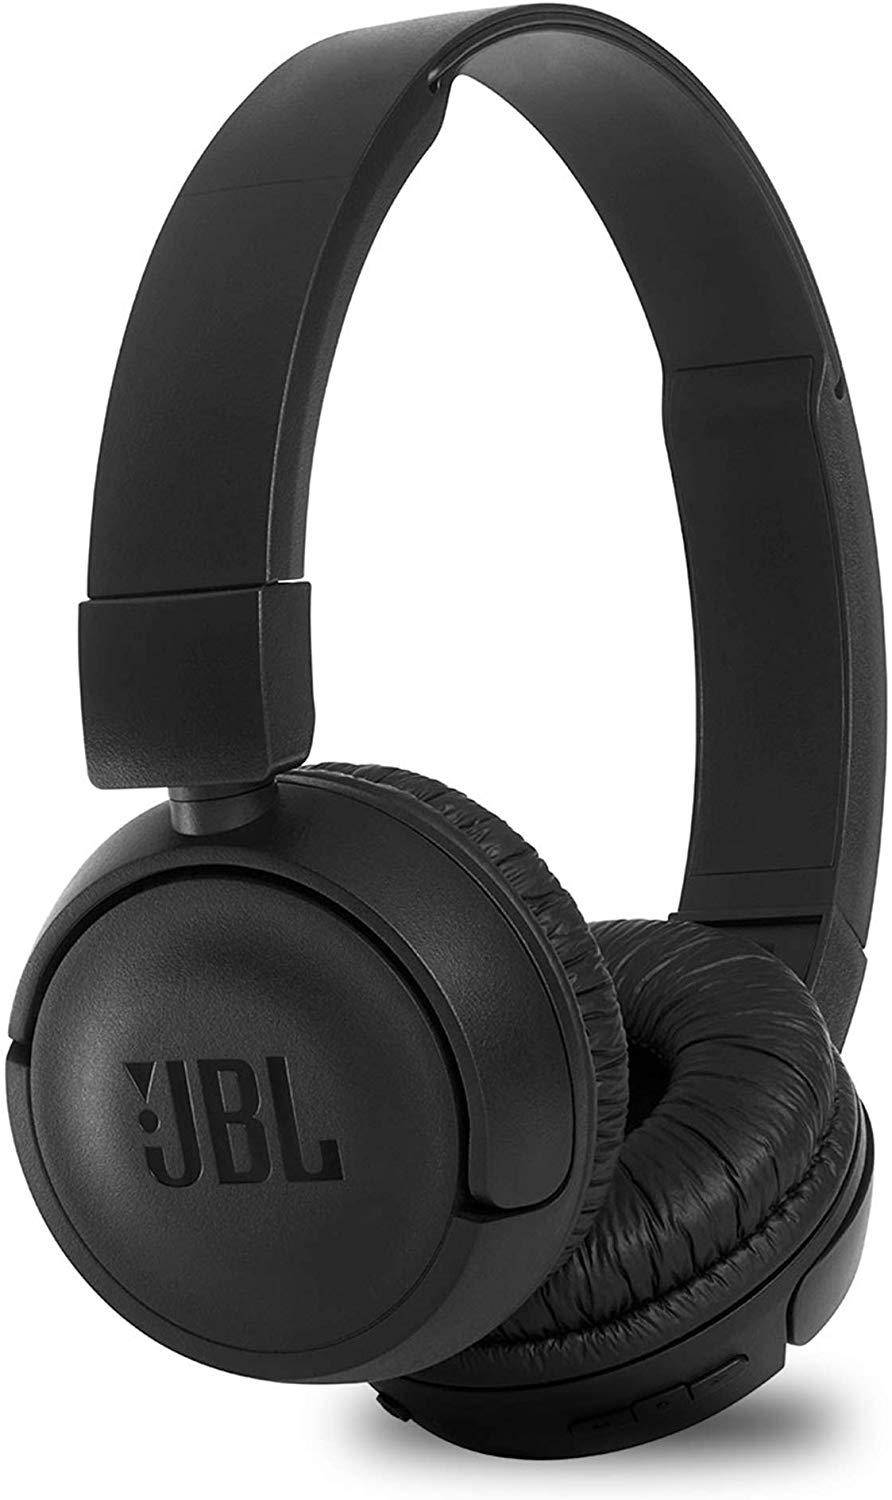 JBL T460BT ExtraBass Headphone with Mic (Wireless) zoom image